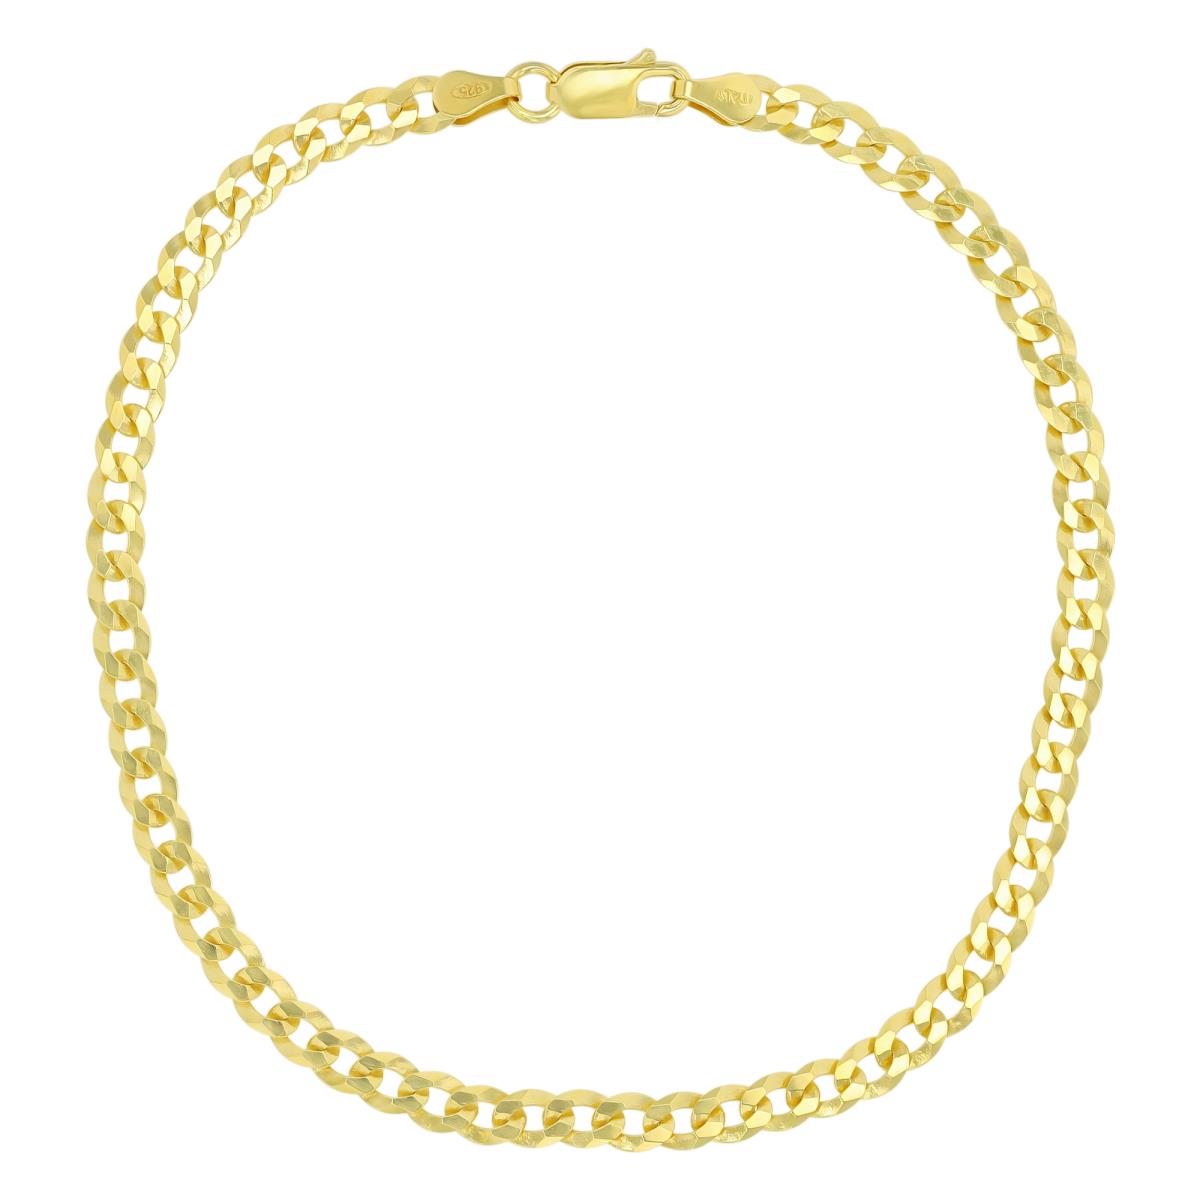 Sterling Silver Yellow 5mm 150 Flat Curb 8.25"Chain Bracelet